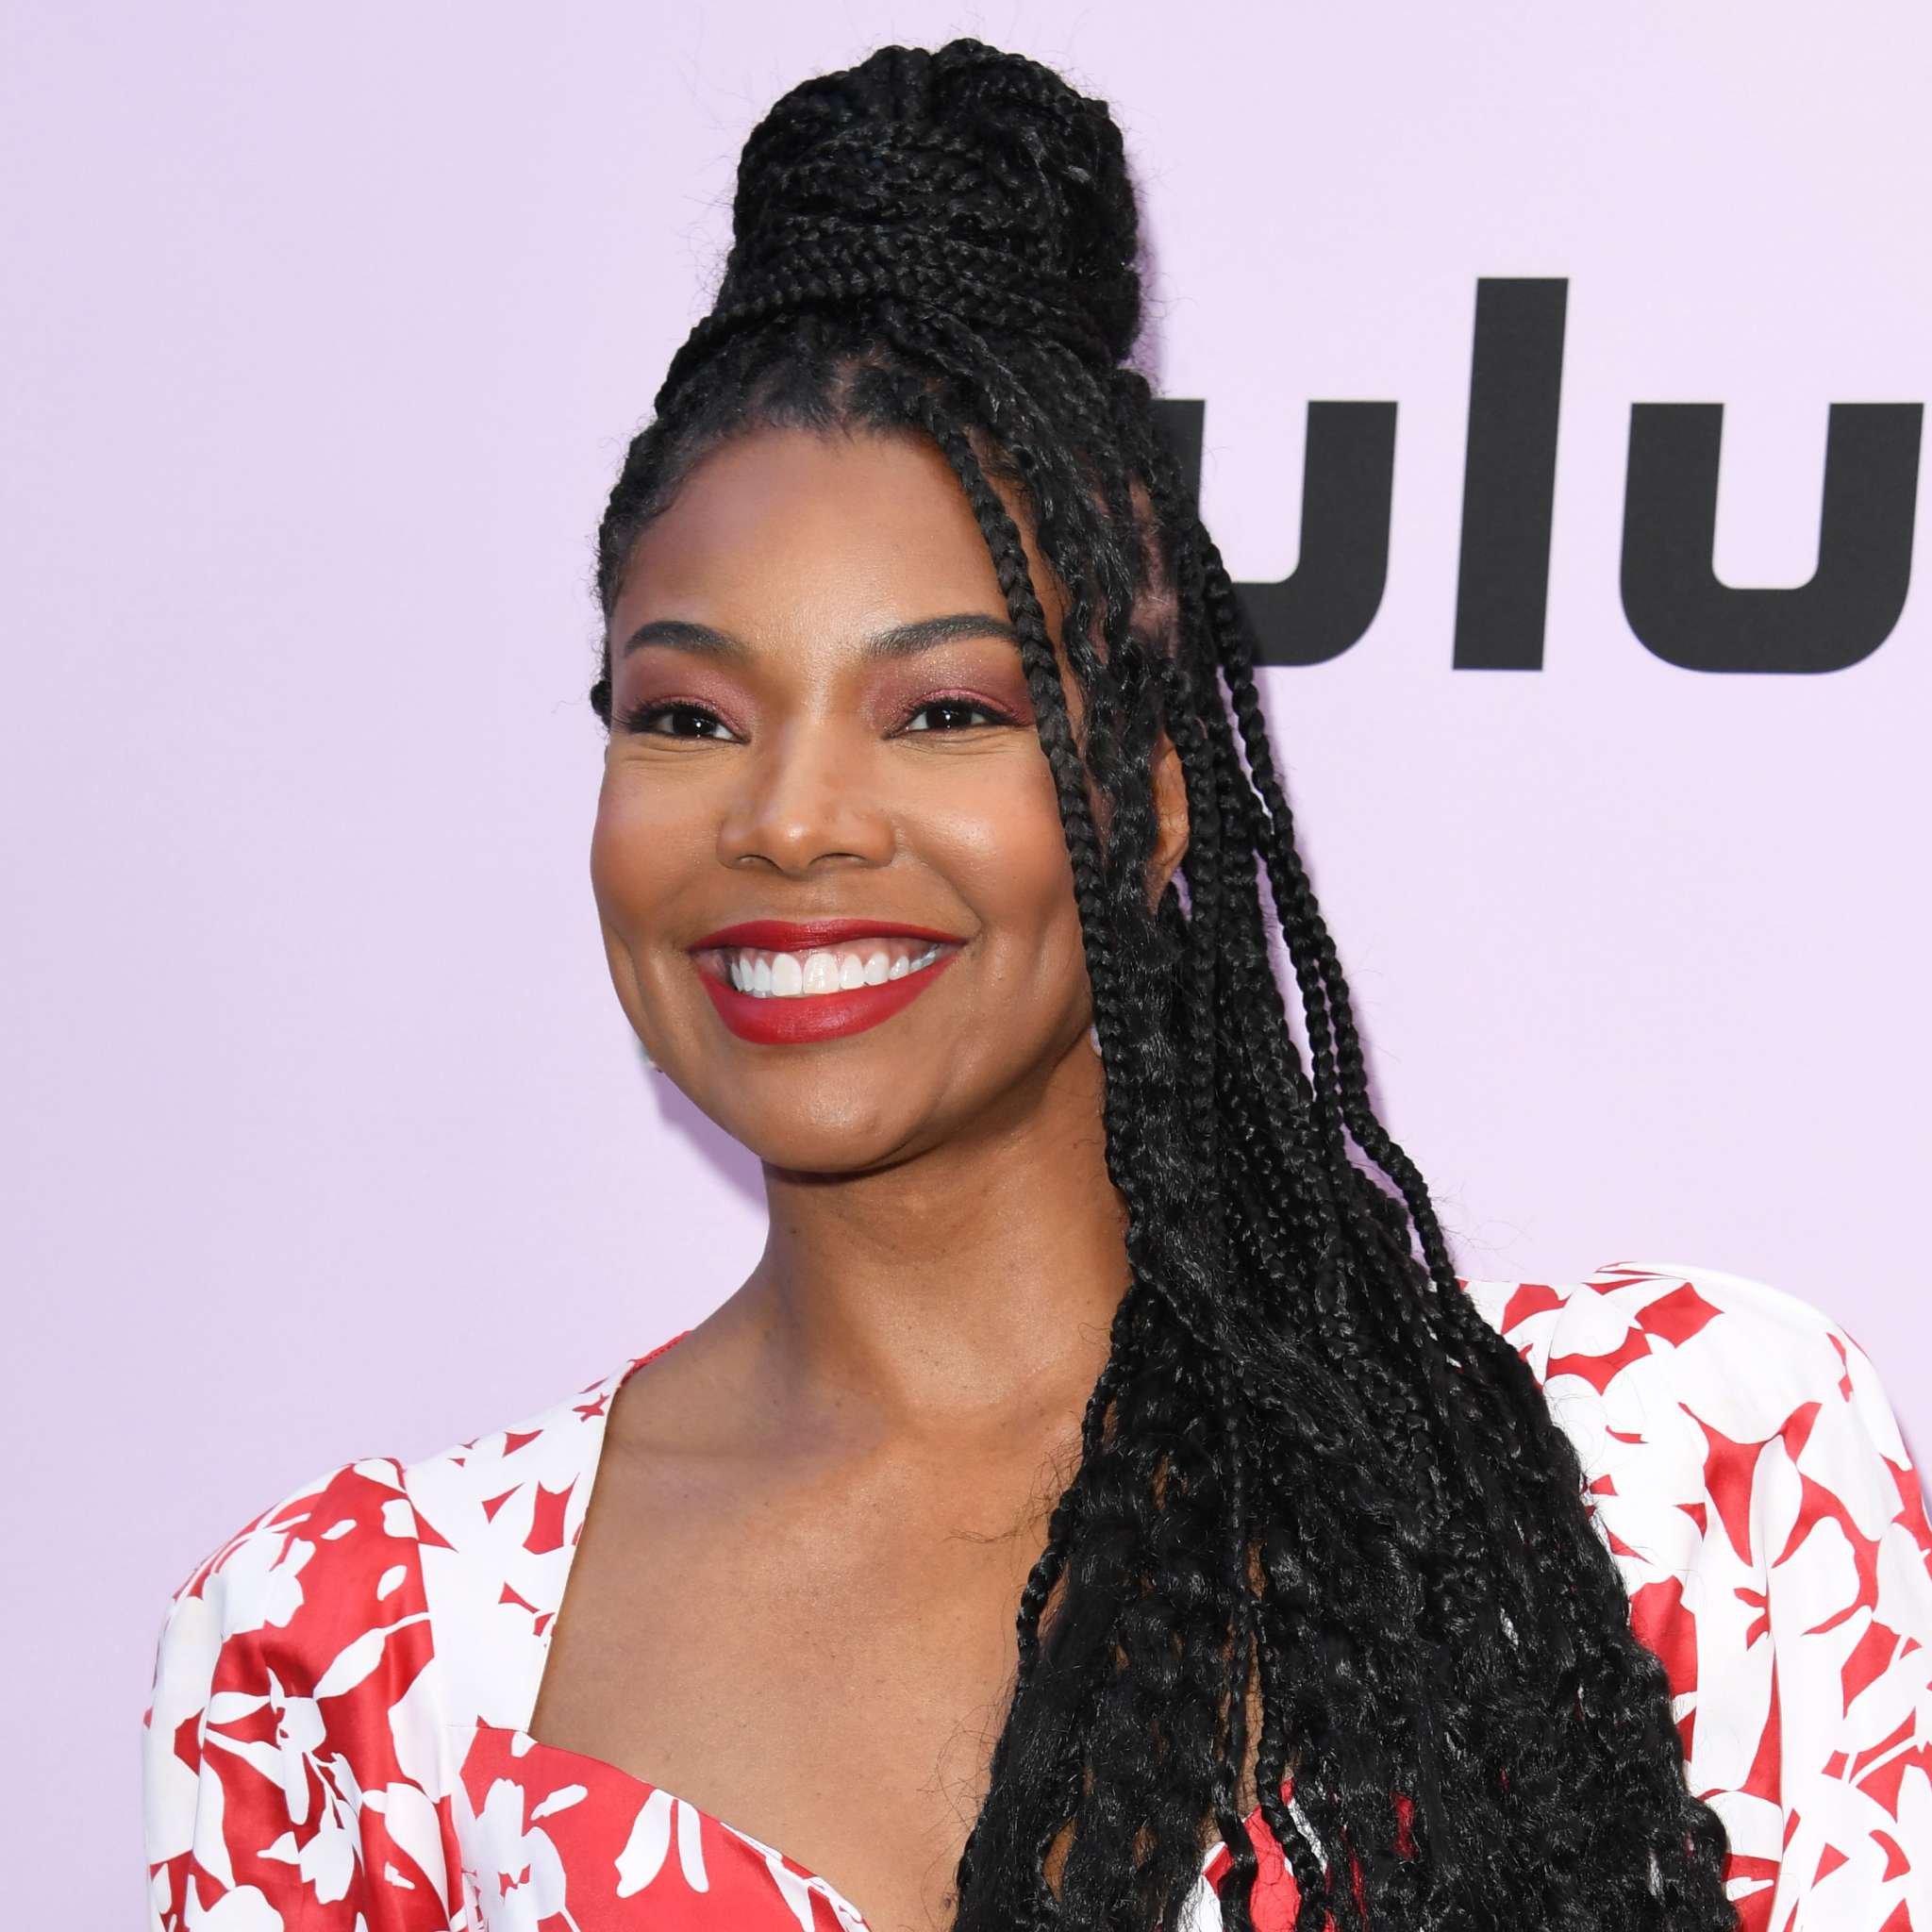 ”gabrielle-union-celebrates-the-birthday-of-her-bff-and-fans-are-impressed-by-her-emotional-message”